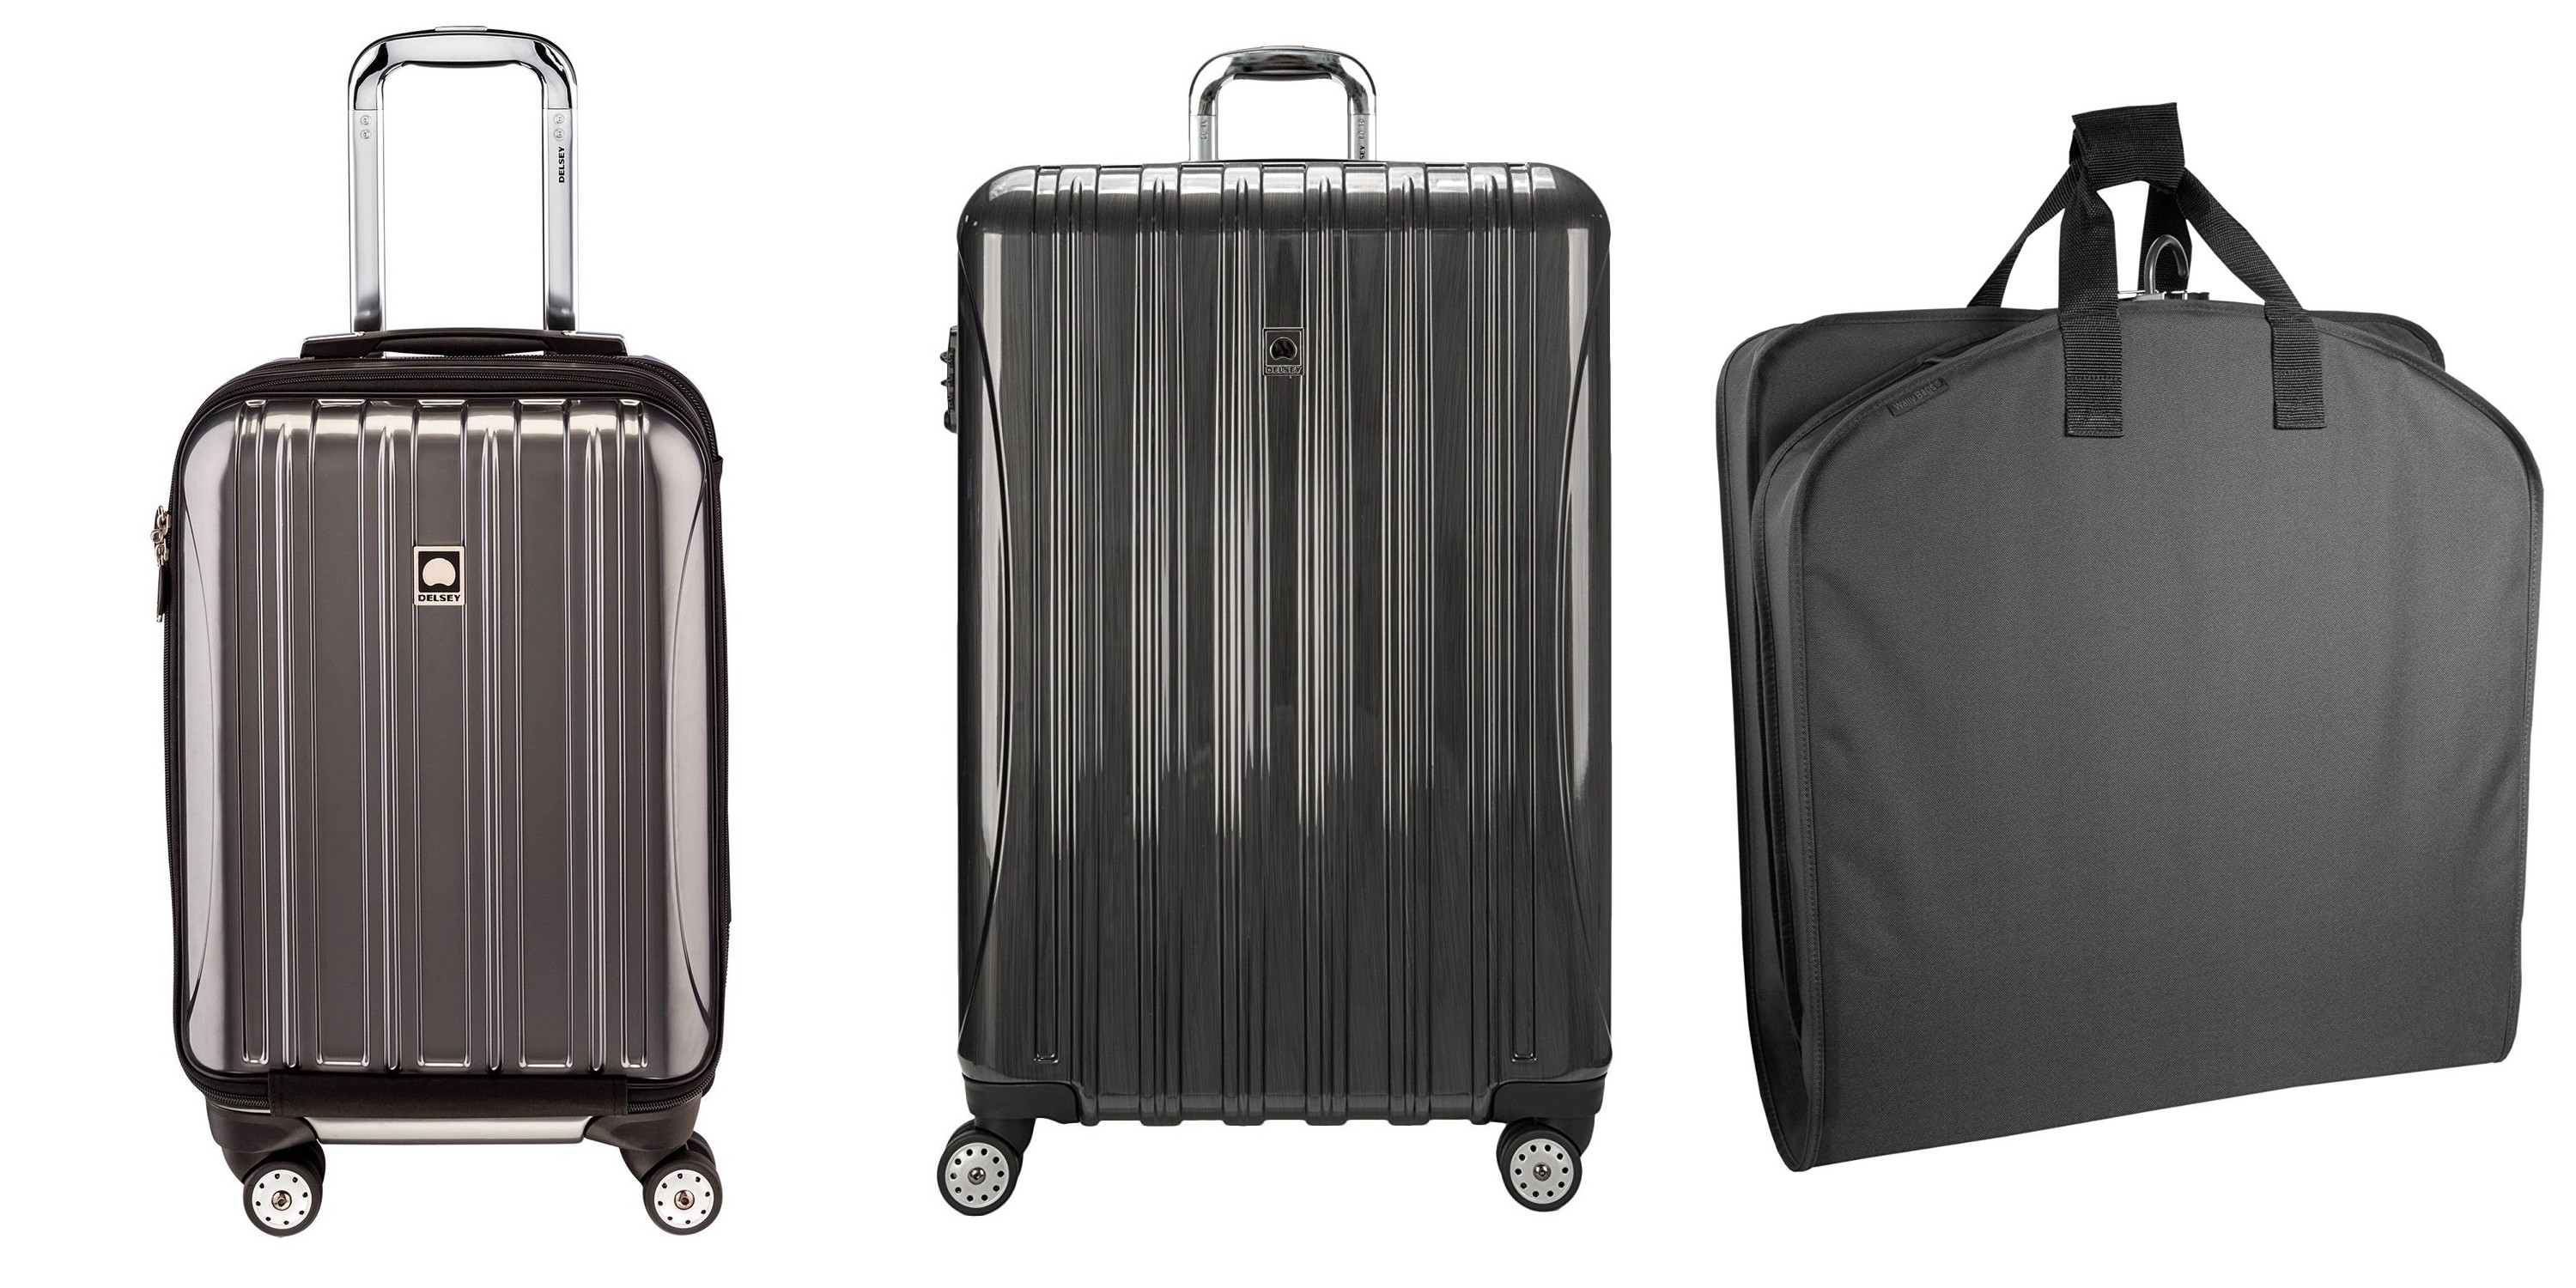 Luggage from $30 for today only at Amazon: carry-ons, garment bags, more - 9to5Toys